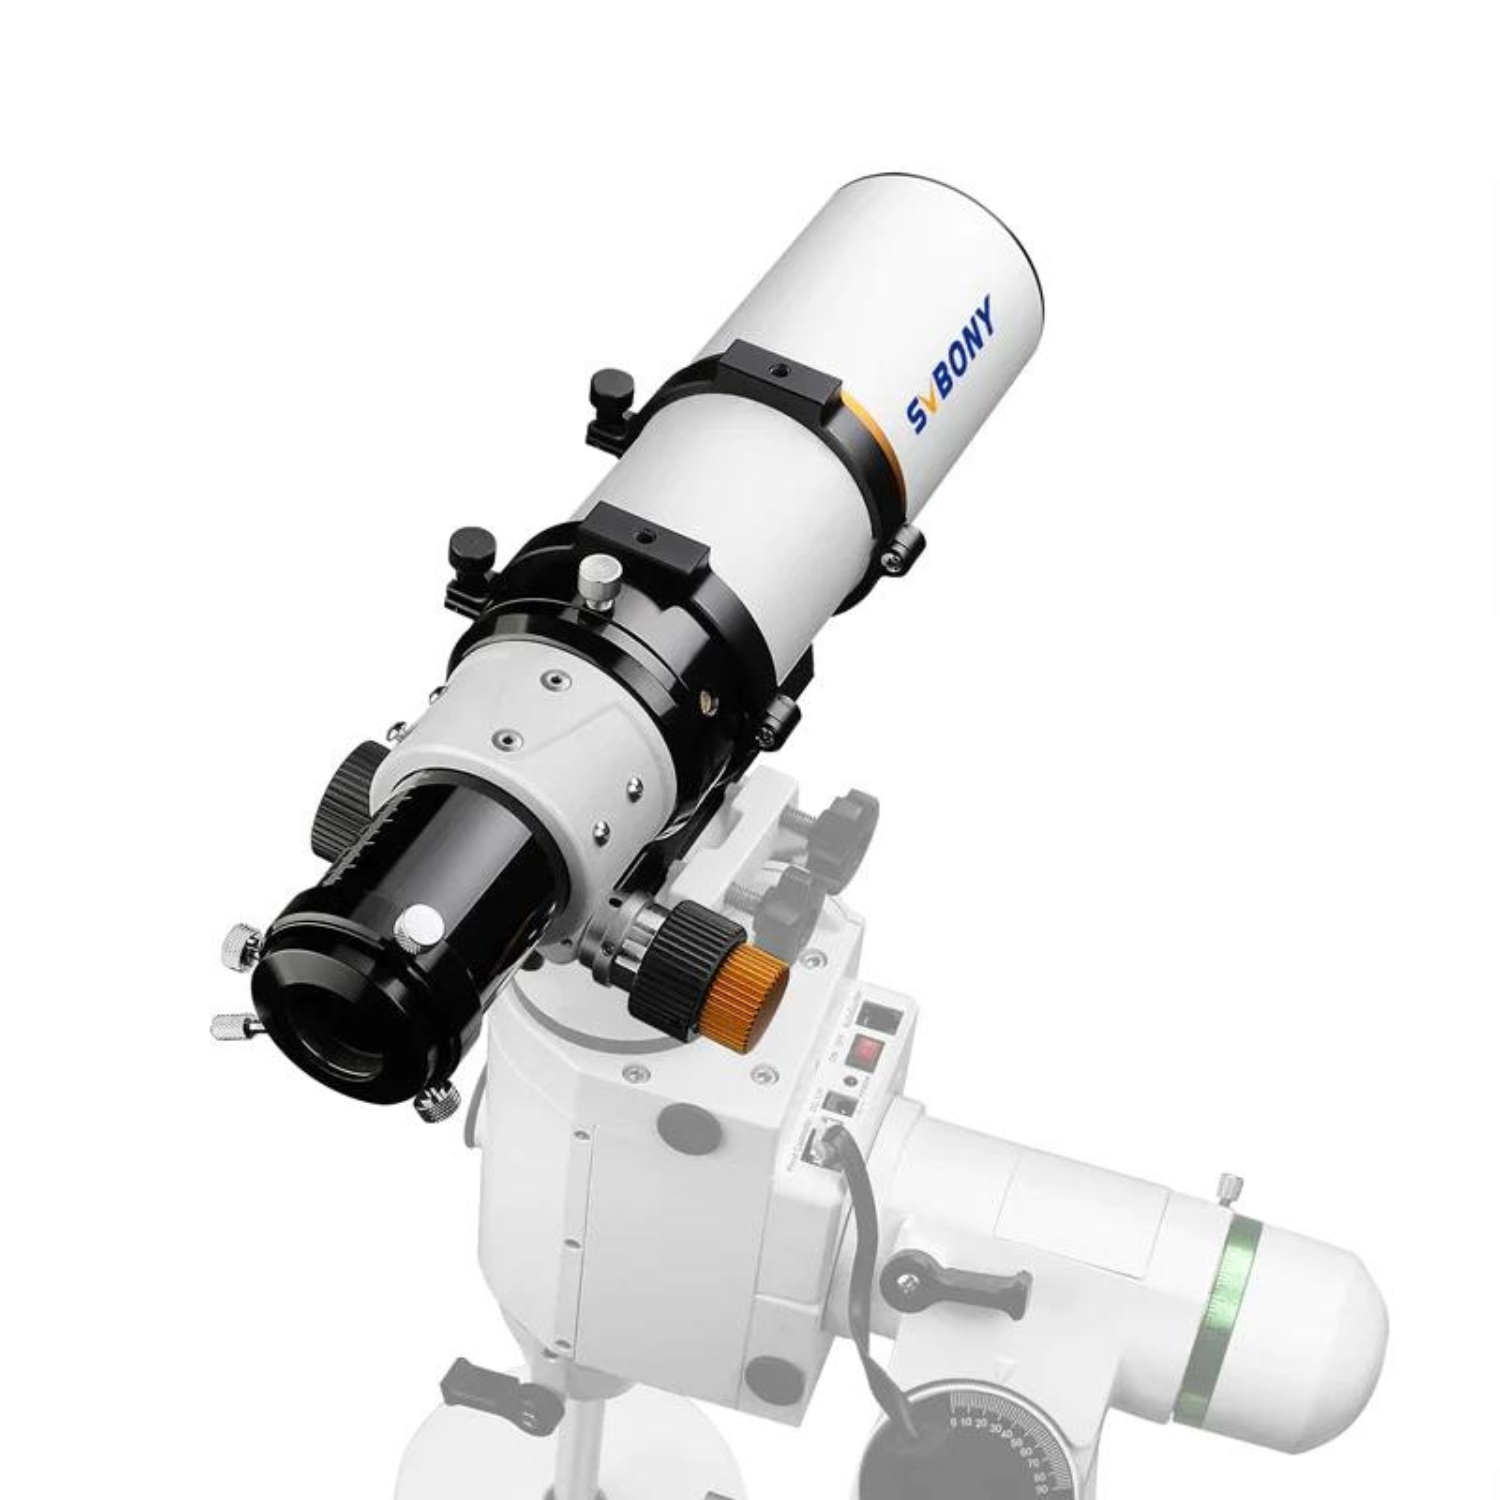 SV503 Professional Astronomical Telescope 70/420 ED Extra Low Dispersion Refractor OTA for Deep-Sky Photography